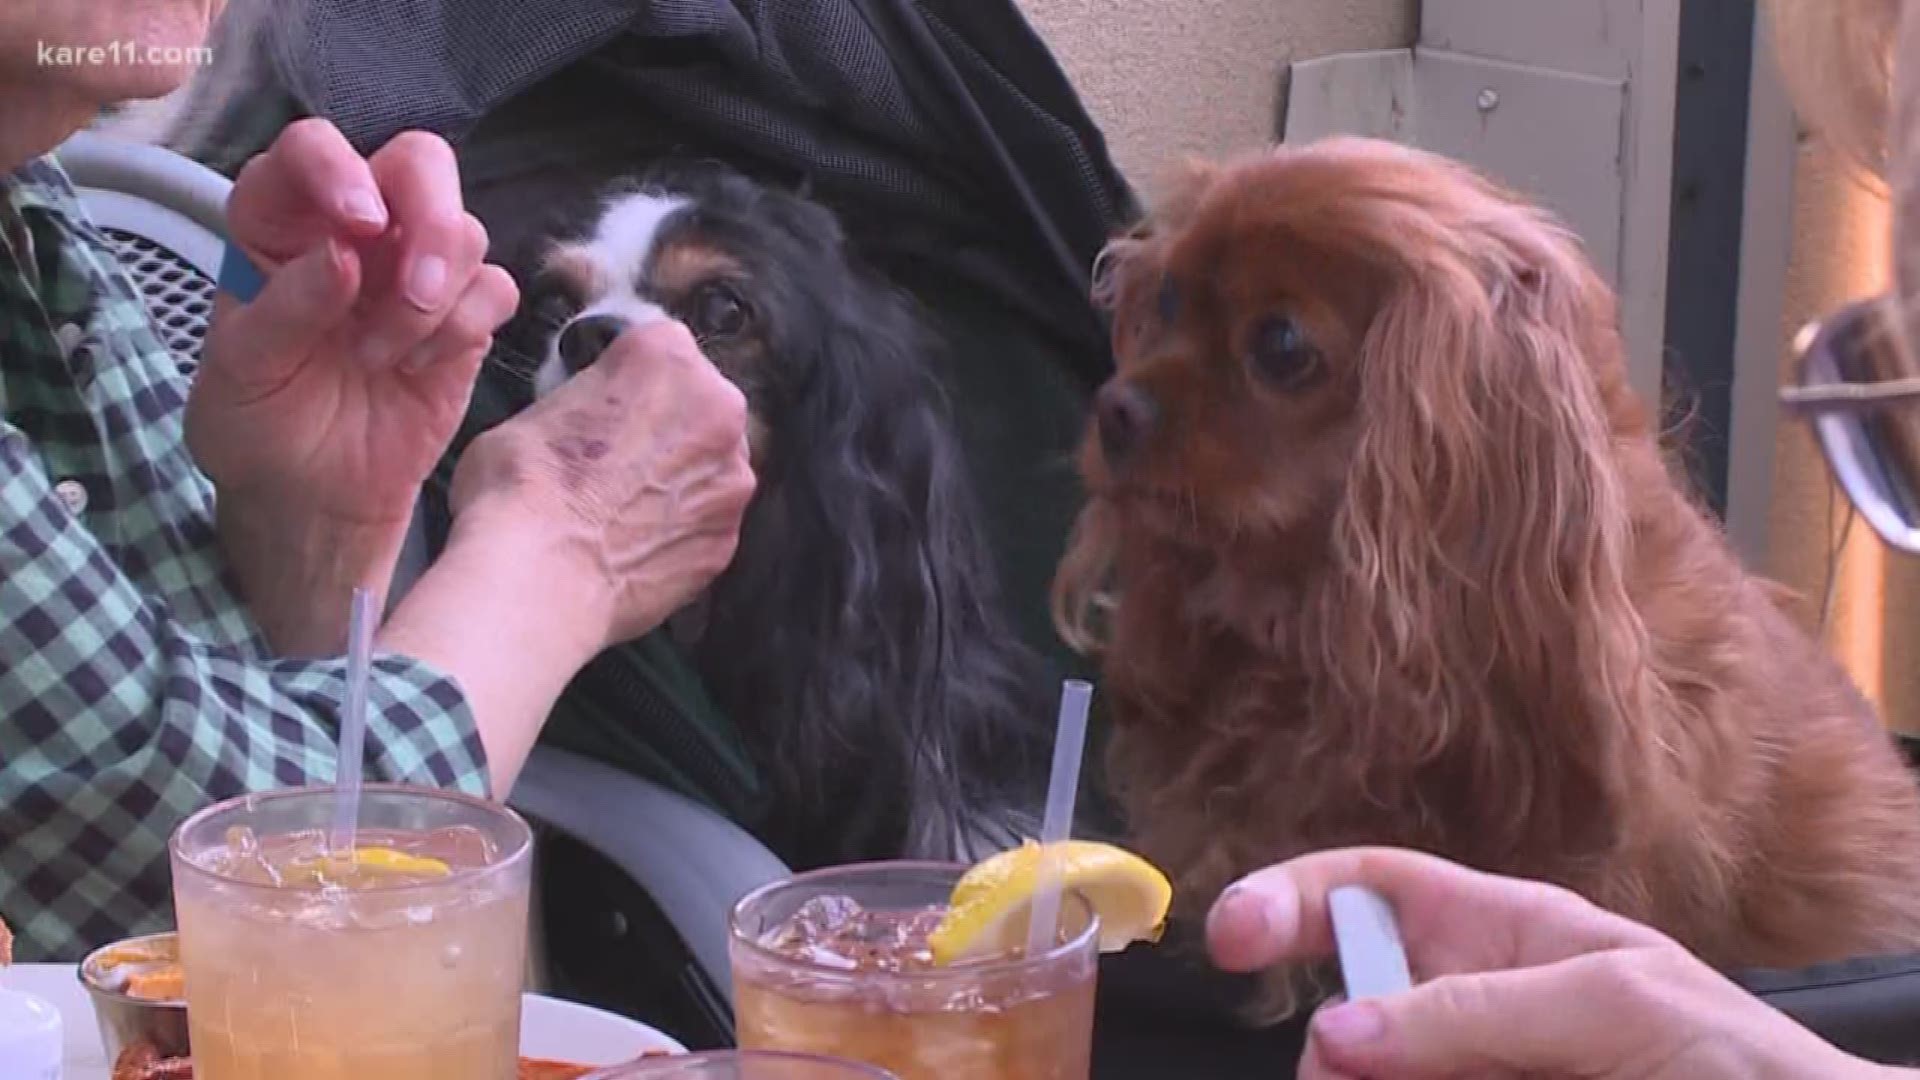 Ali Jarvis with Sidewalk Dog shares intel about the hottest local dog-friendly patios and taprooms, and gives some tips for etiquette so that everyone has the best paw-ssible experience. https://kare11.tv/2JOzs0w